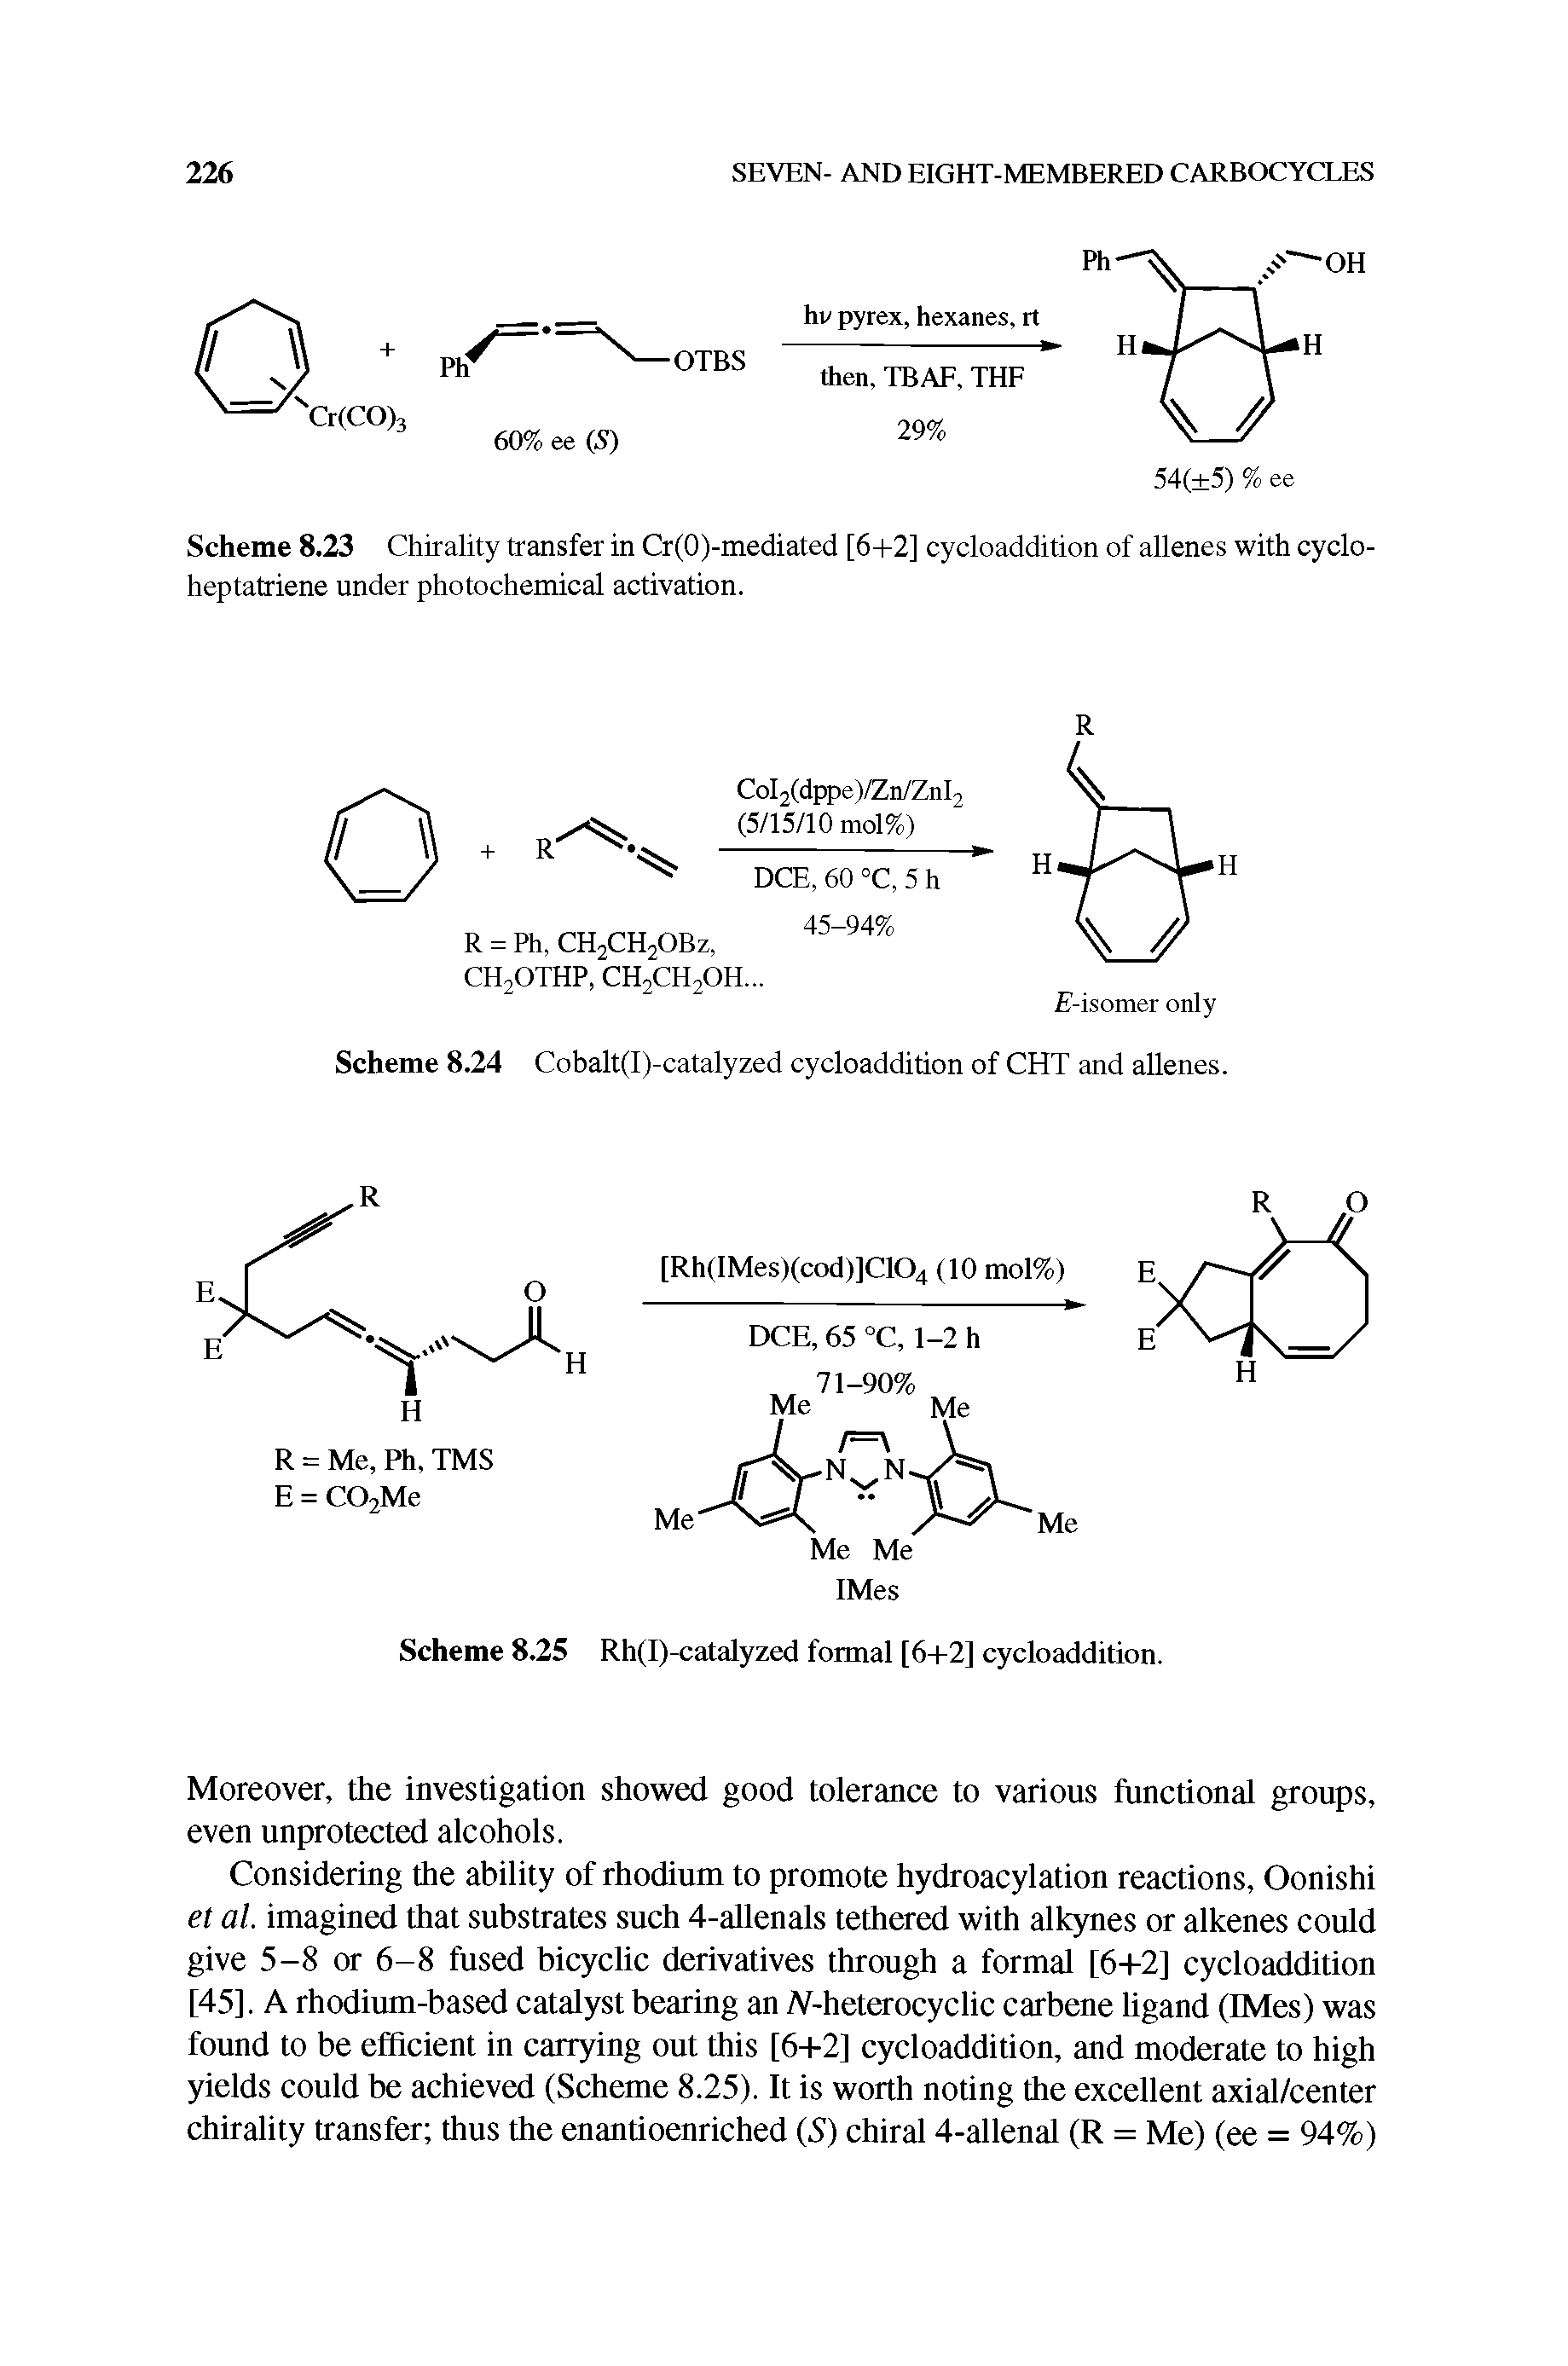 Scheme 8.23 Chirality transfer in Cr(0)-mediated [6-1-2] cycloaddition of allenes with cyclo-heptatriene under photochemical activation.